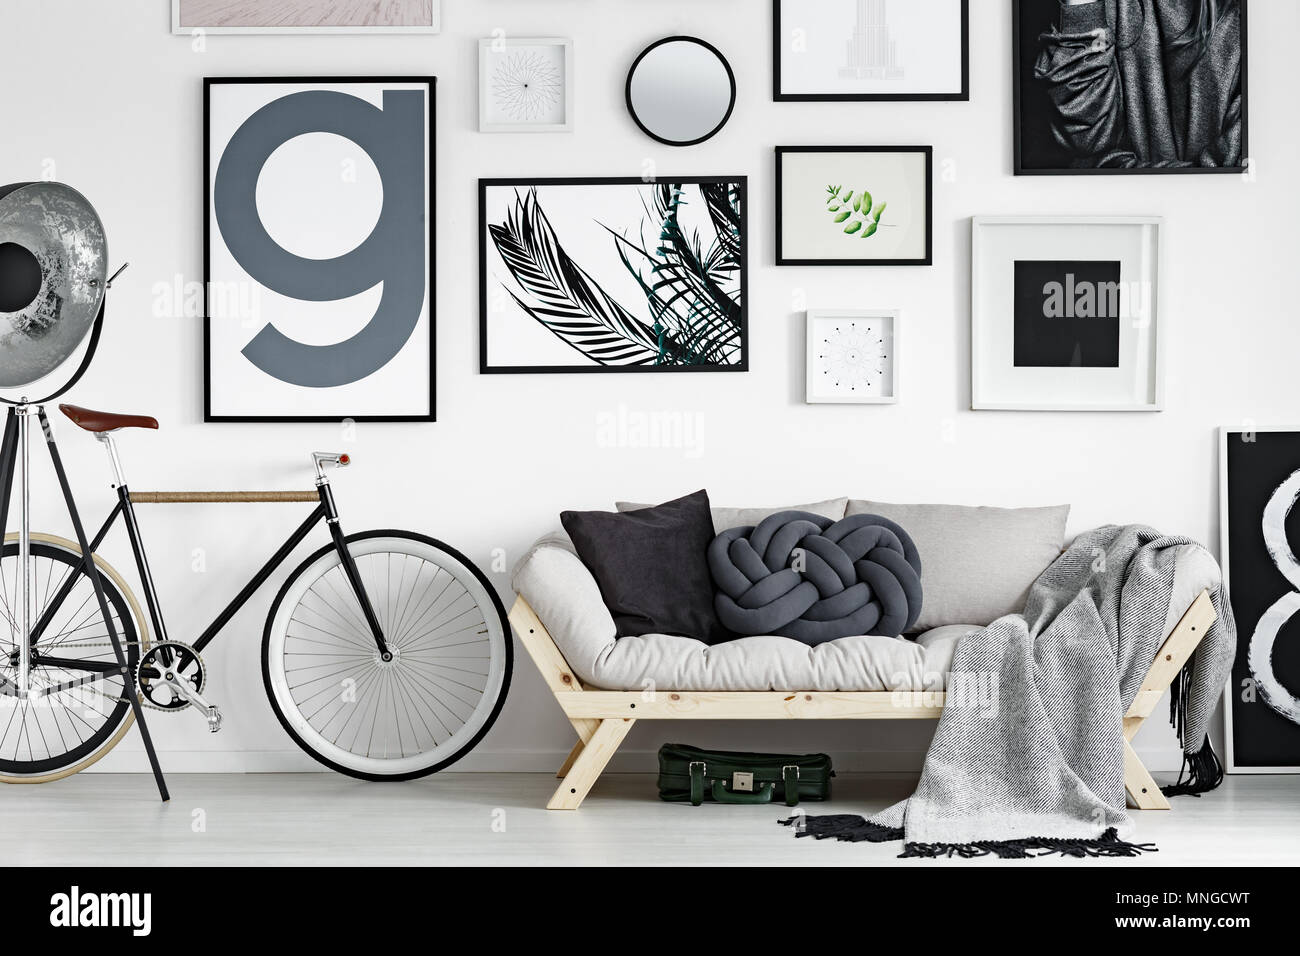 Vintage bike by wooden sofa in scandinavian style living room Stock Photo -  Alamy